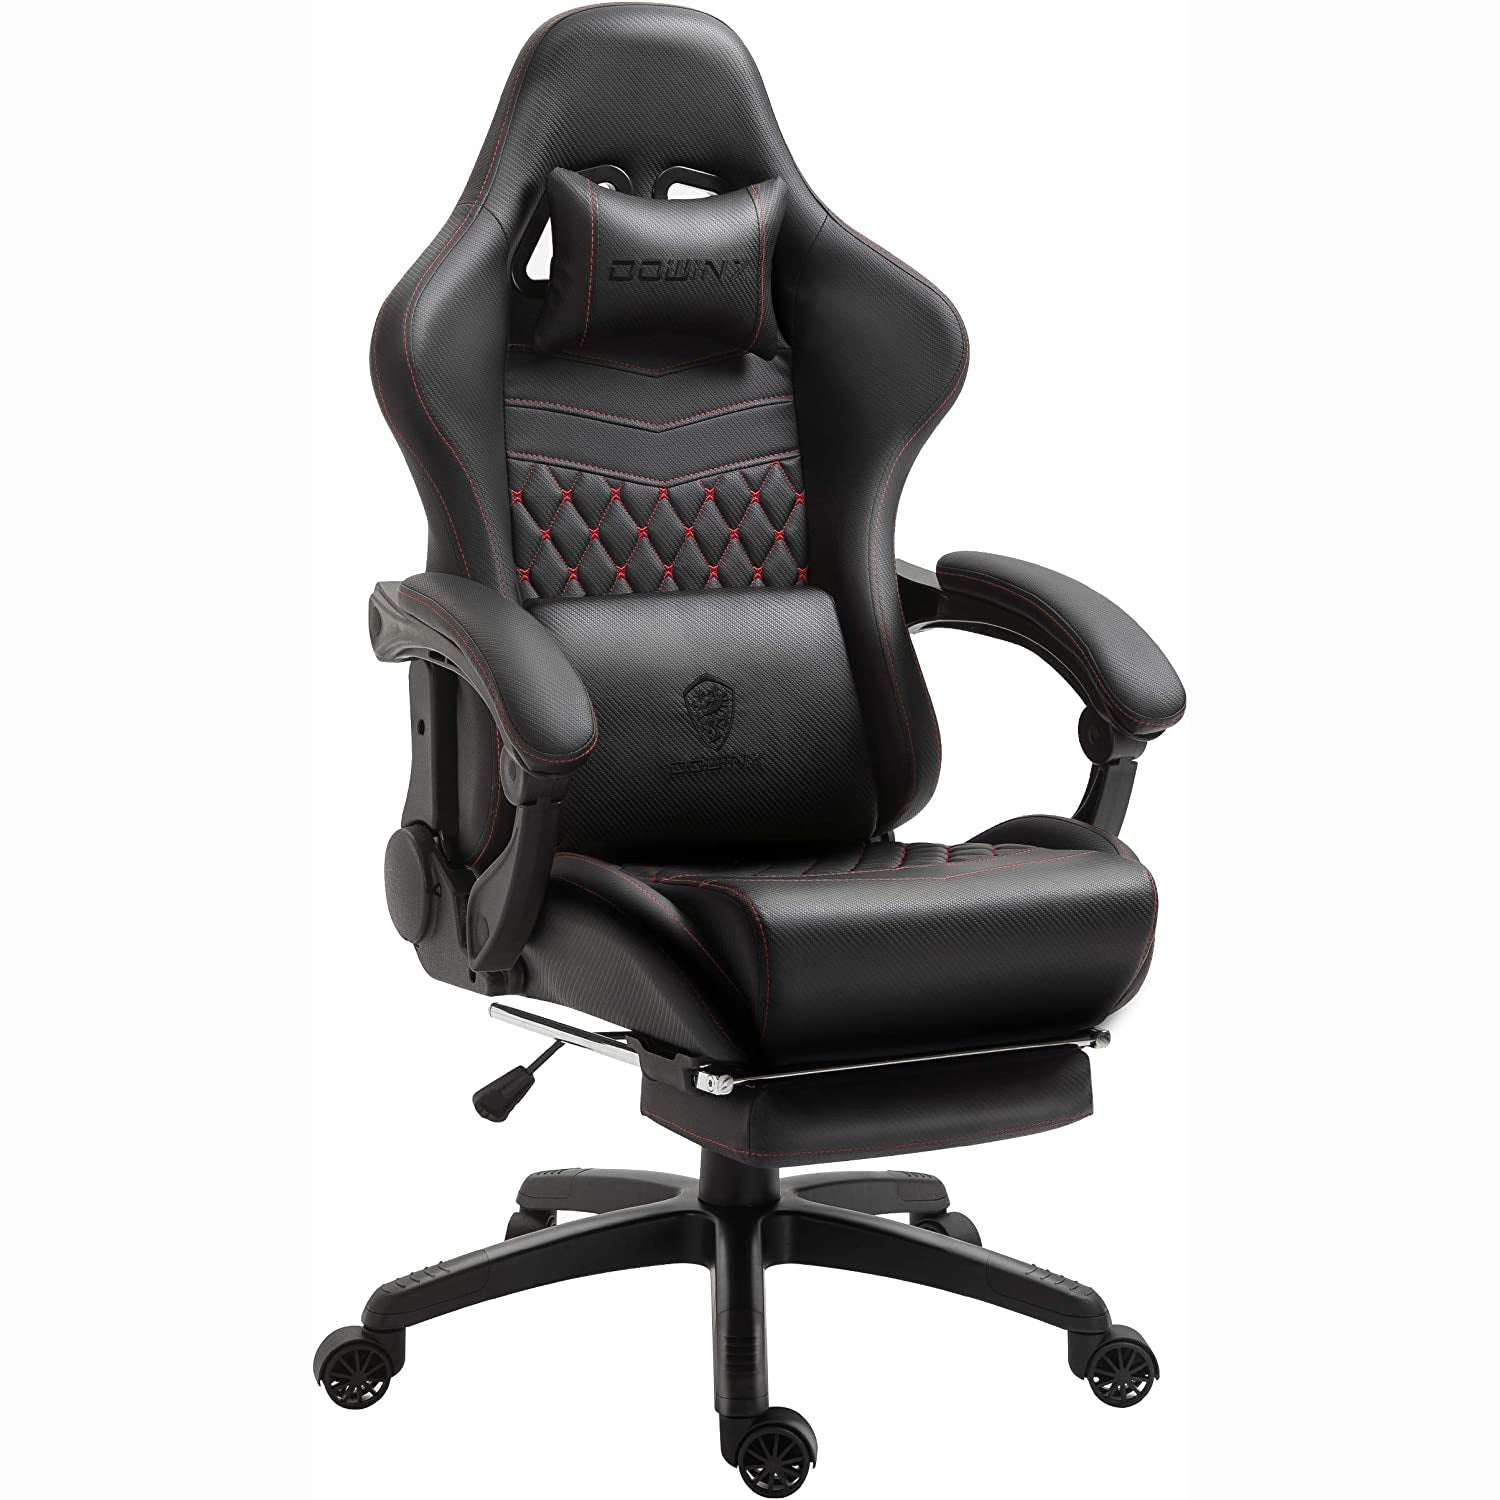 Dowinx 6689 Gaming Office Chair Ergonomic Racing Style-Black&Red 